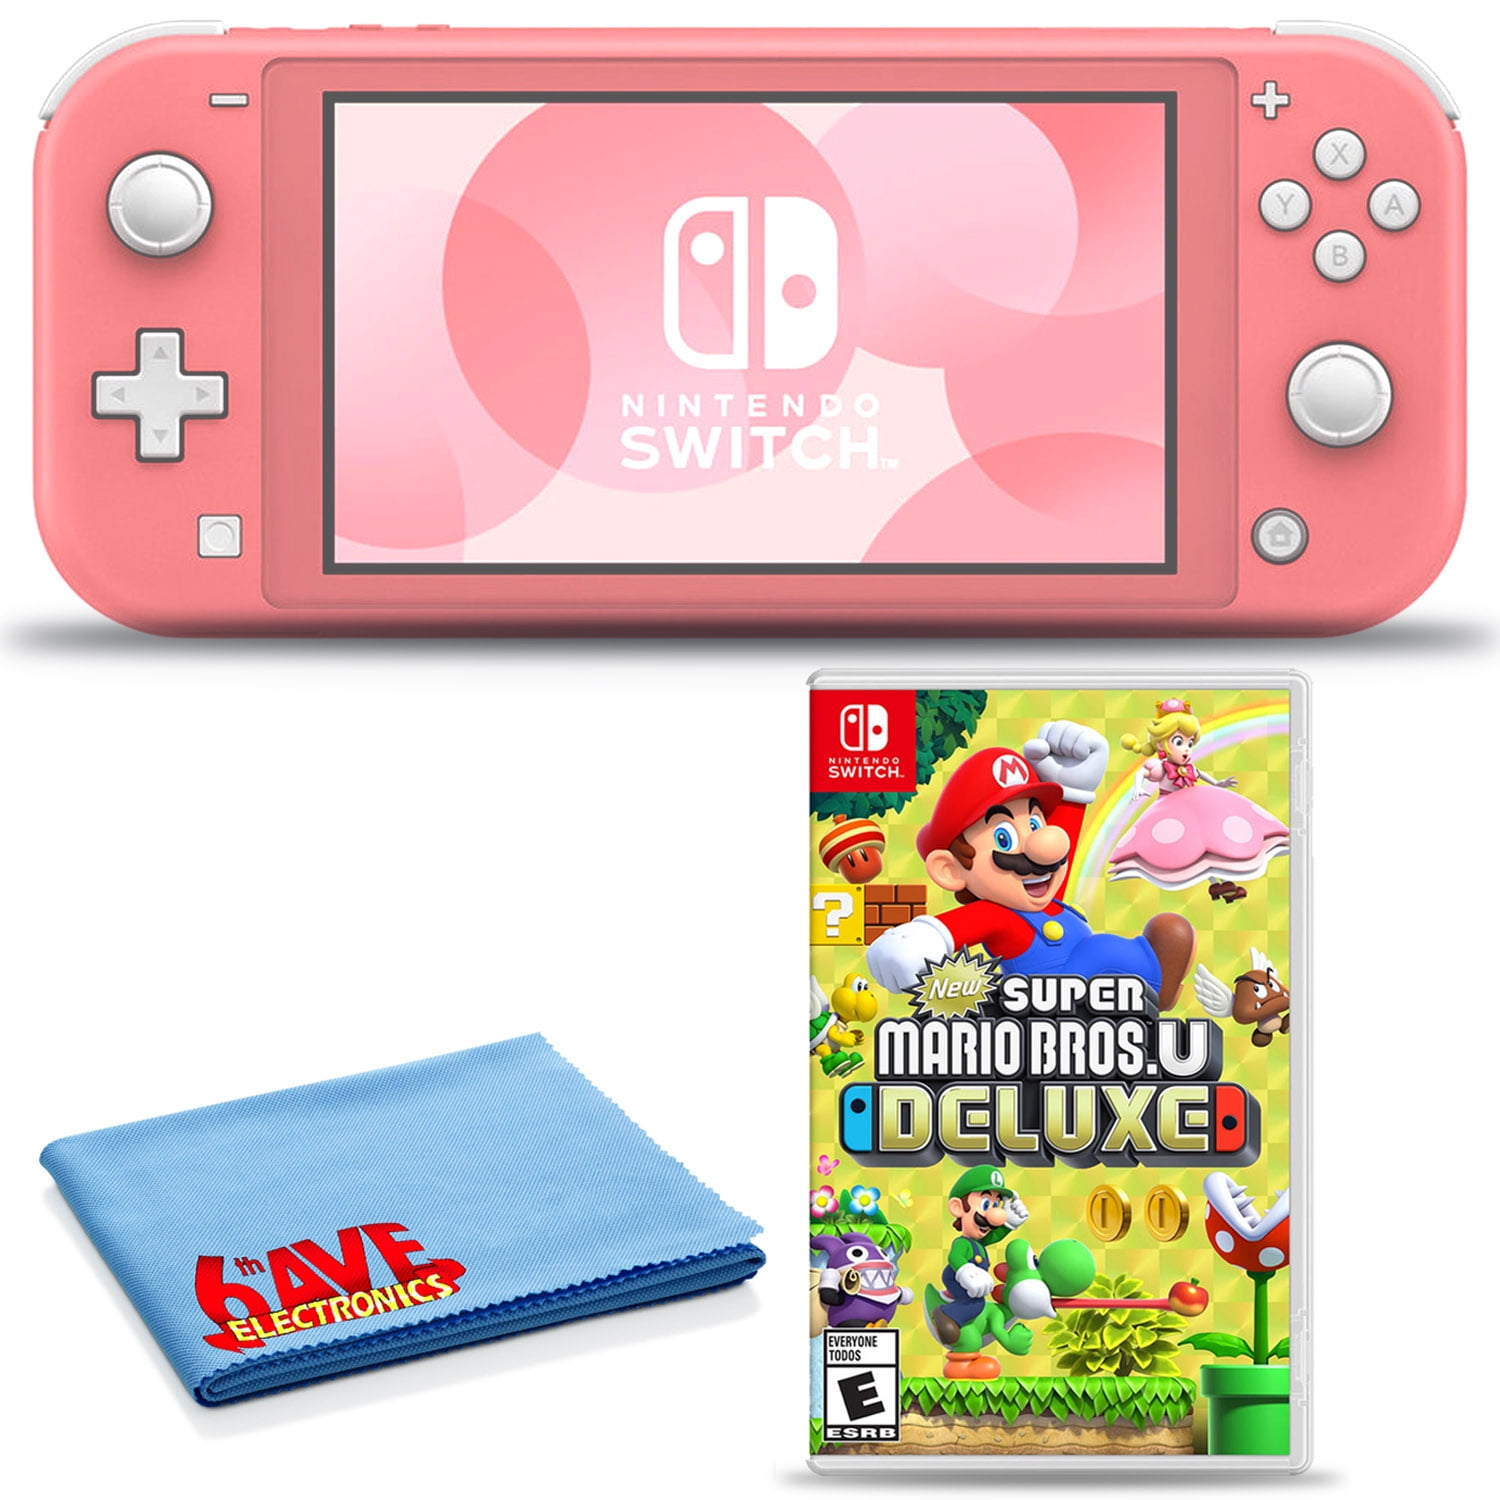 Nintendo Switch - New Super Mario Bros U Deluxe - Game Physical Cassette  for Switch OLED Lite Game Console - AliExpress